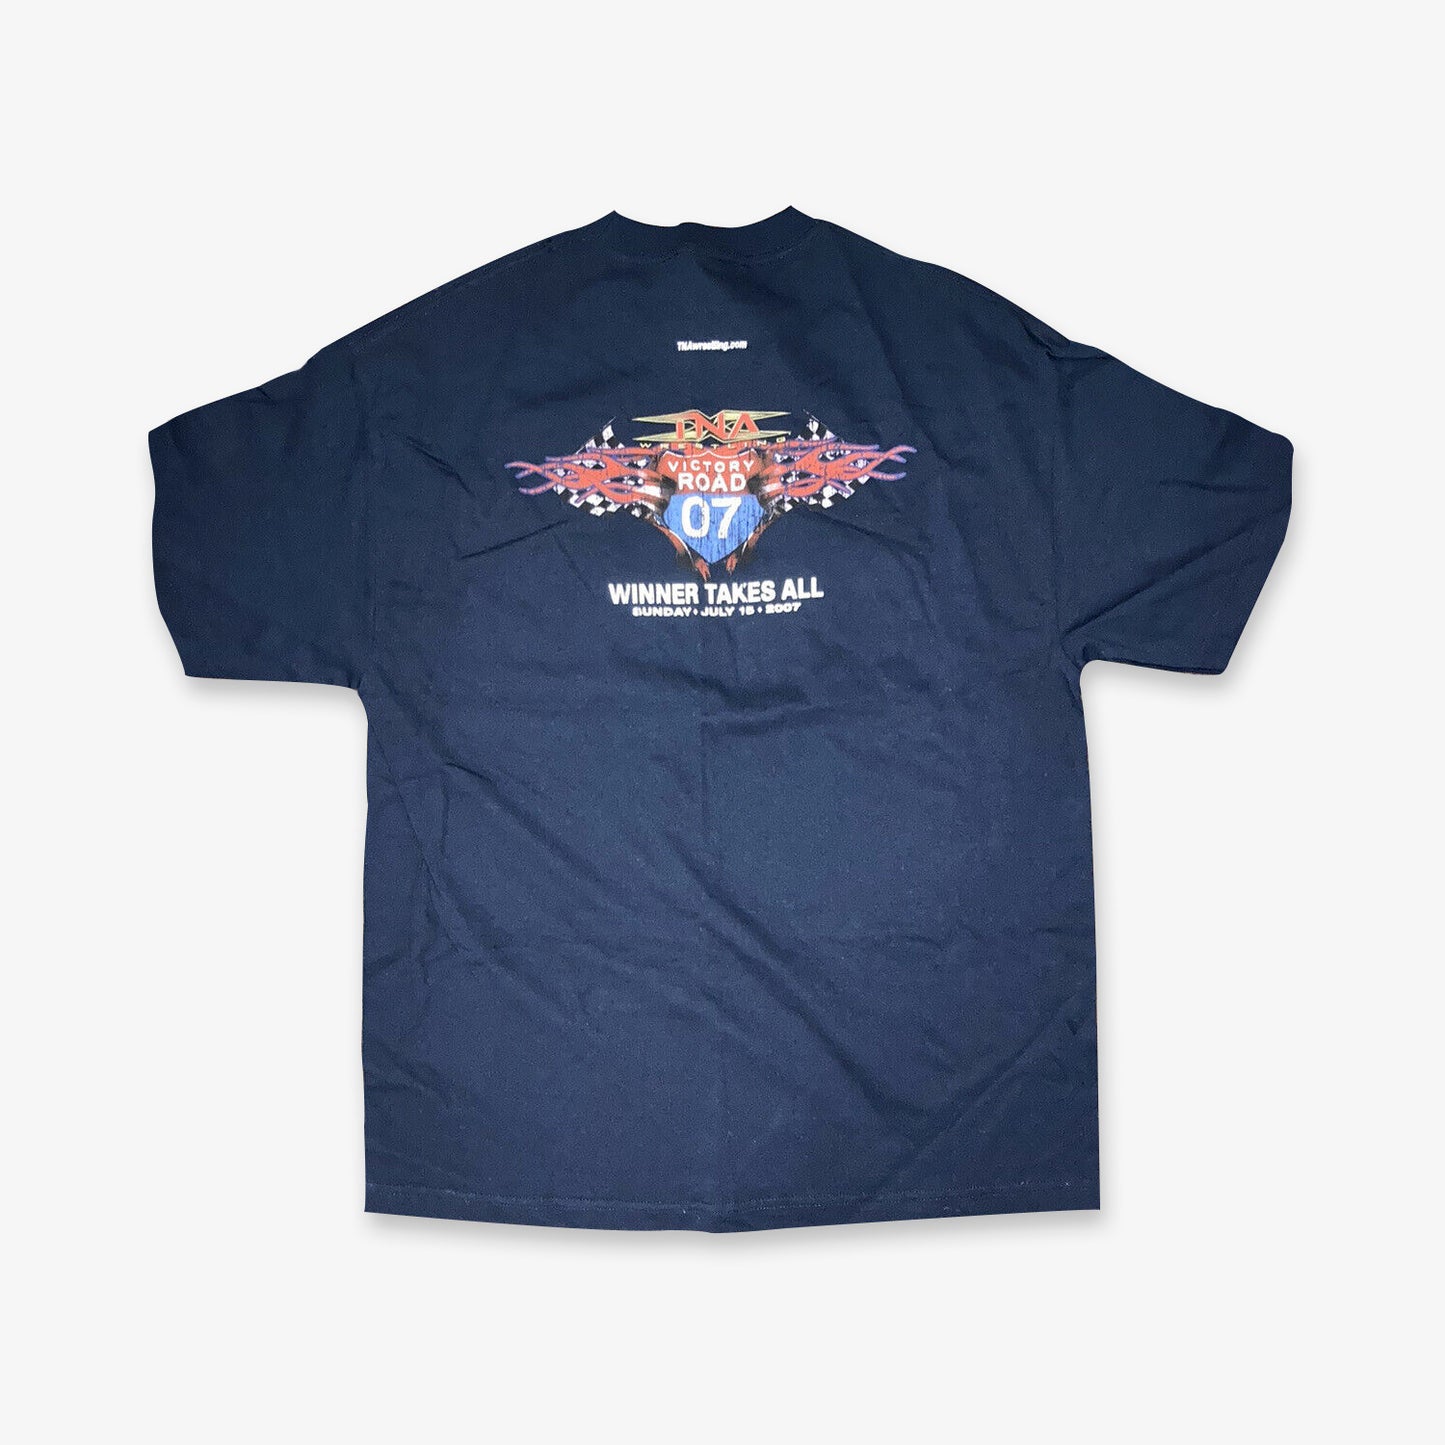 Victory Road 2007 Event Shirt